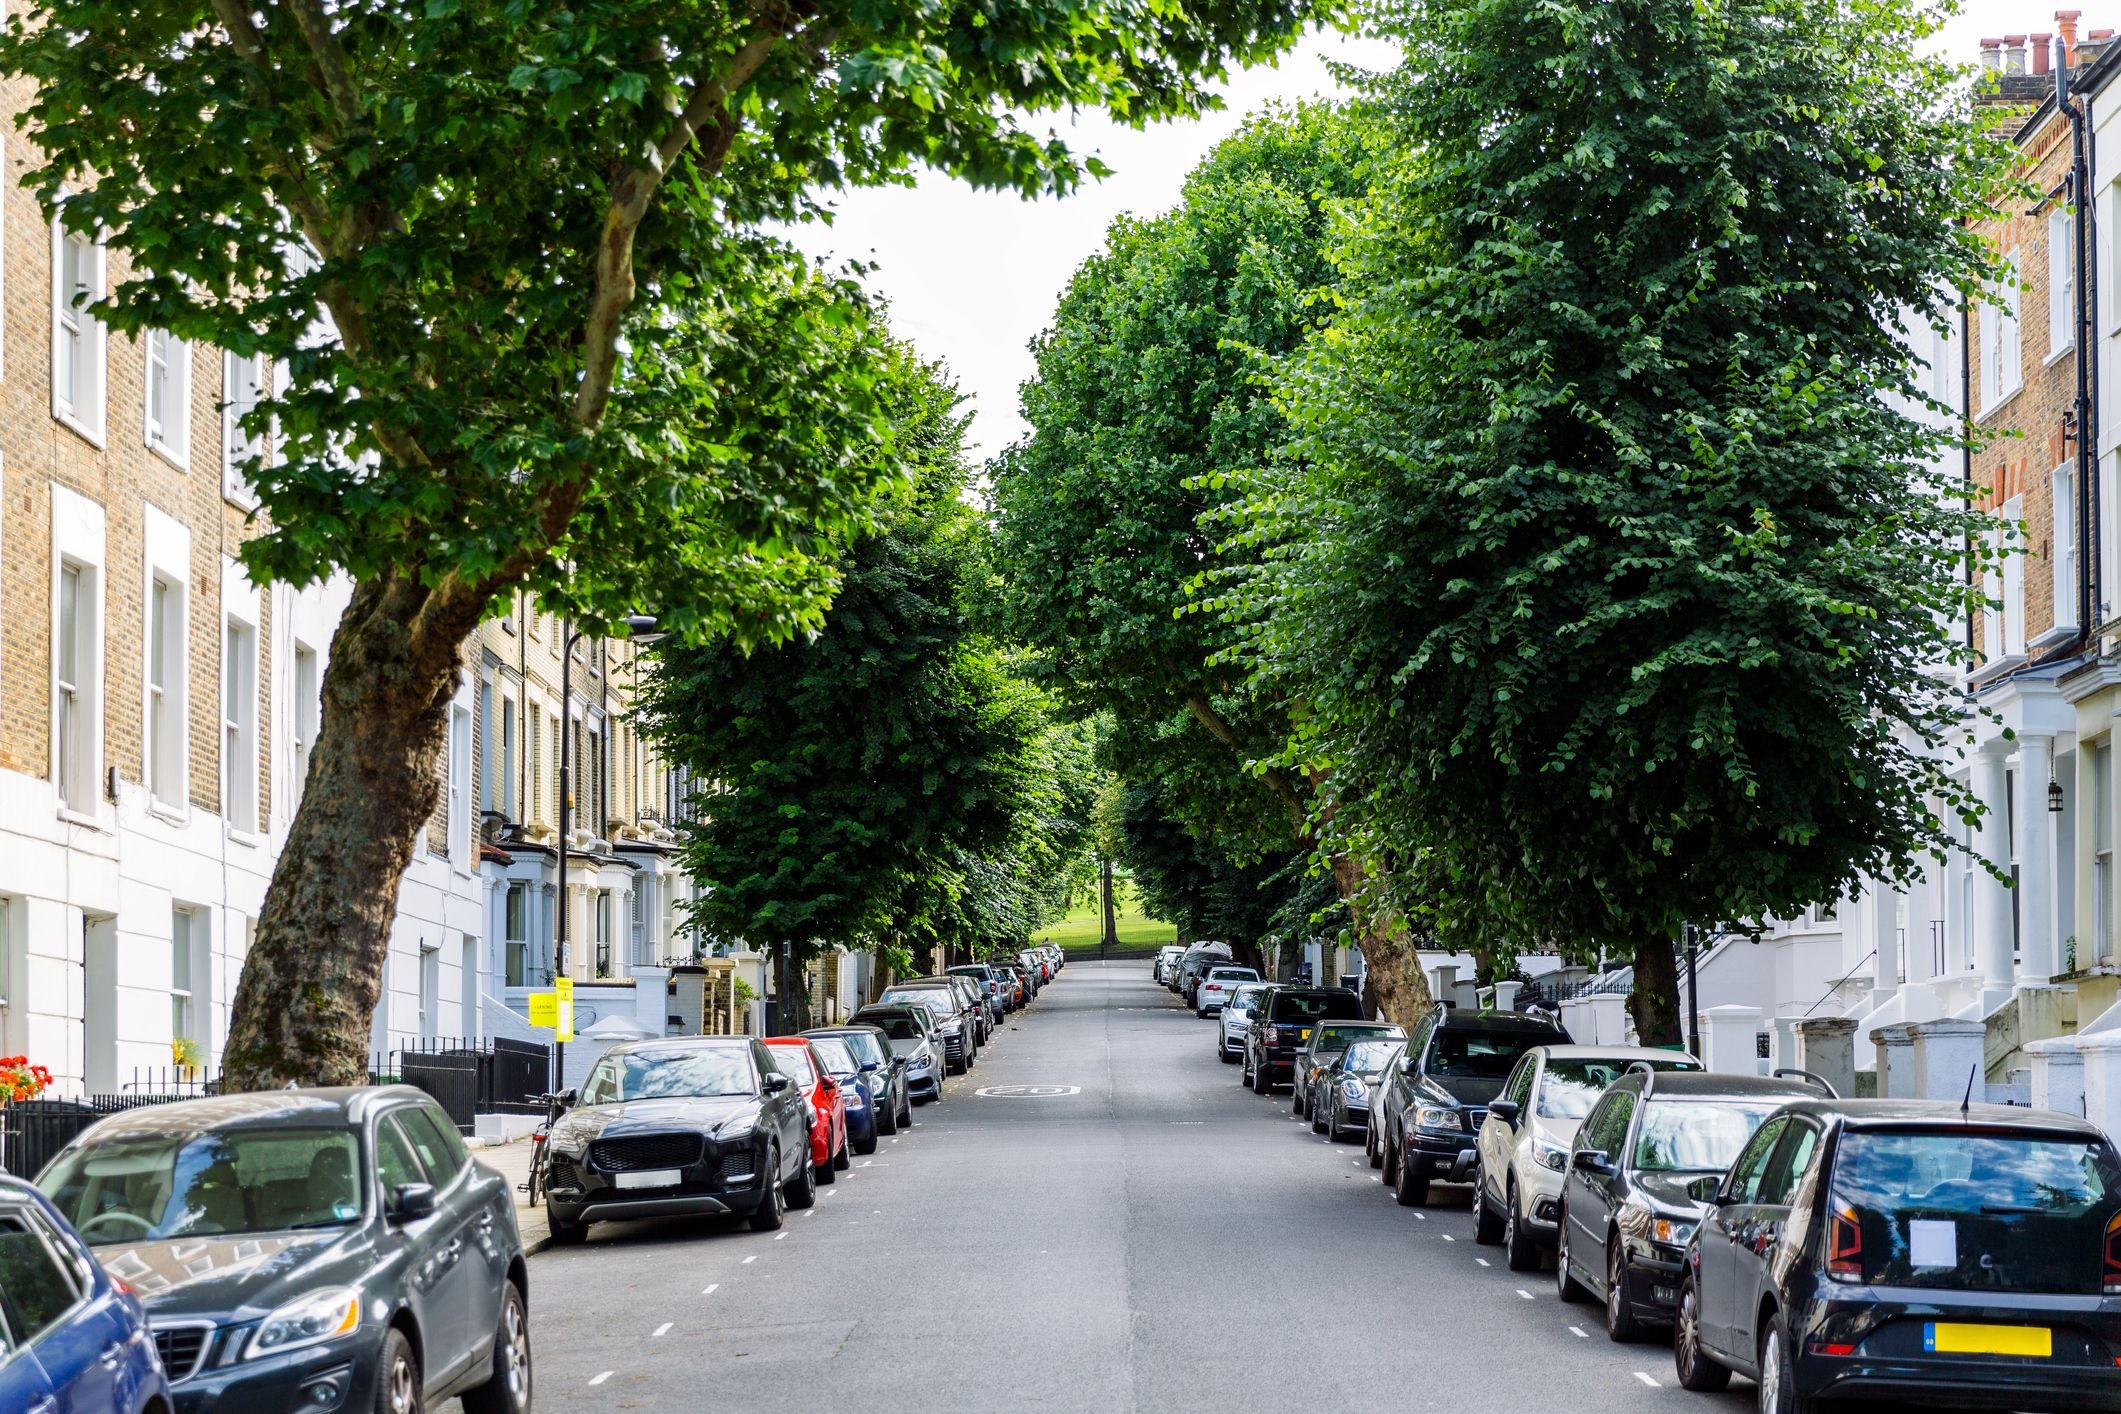 Several cars on the street. | Source: Shutterstock